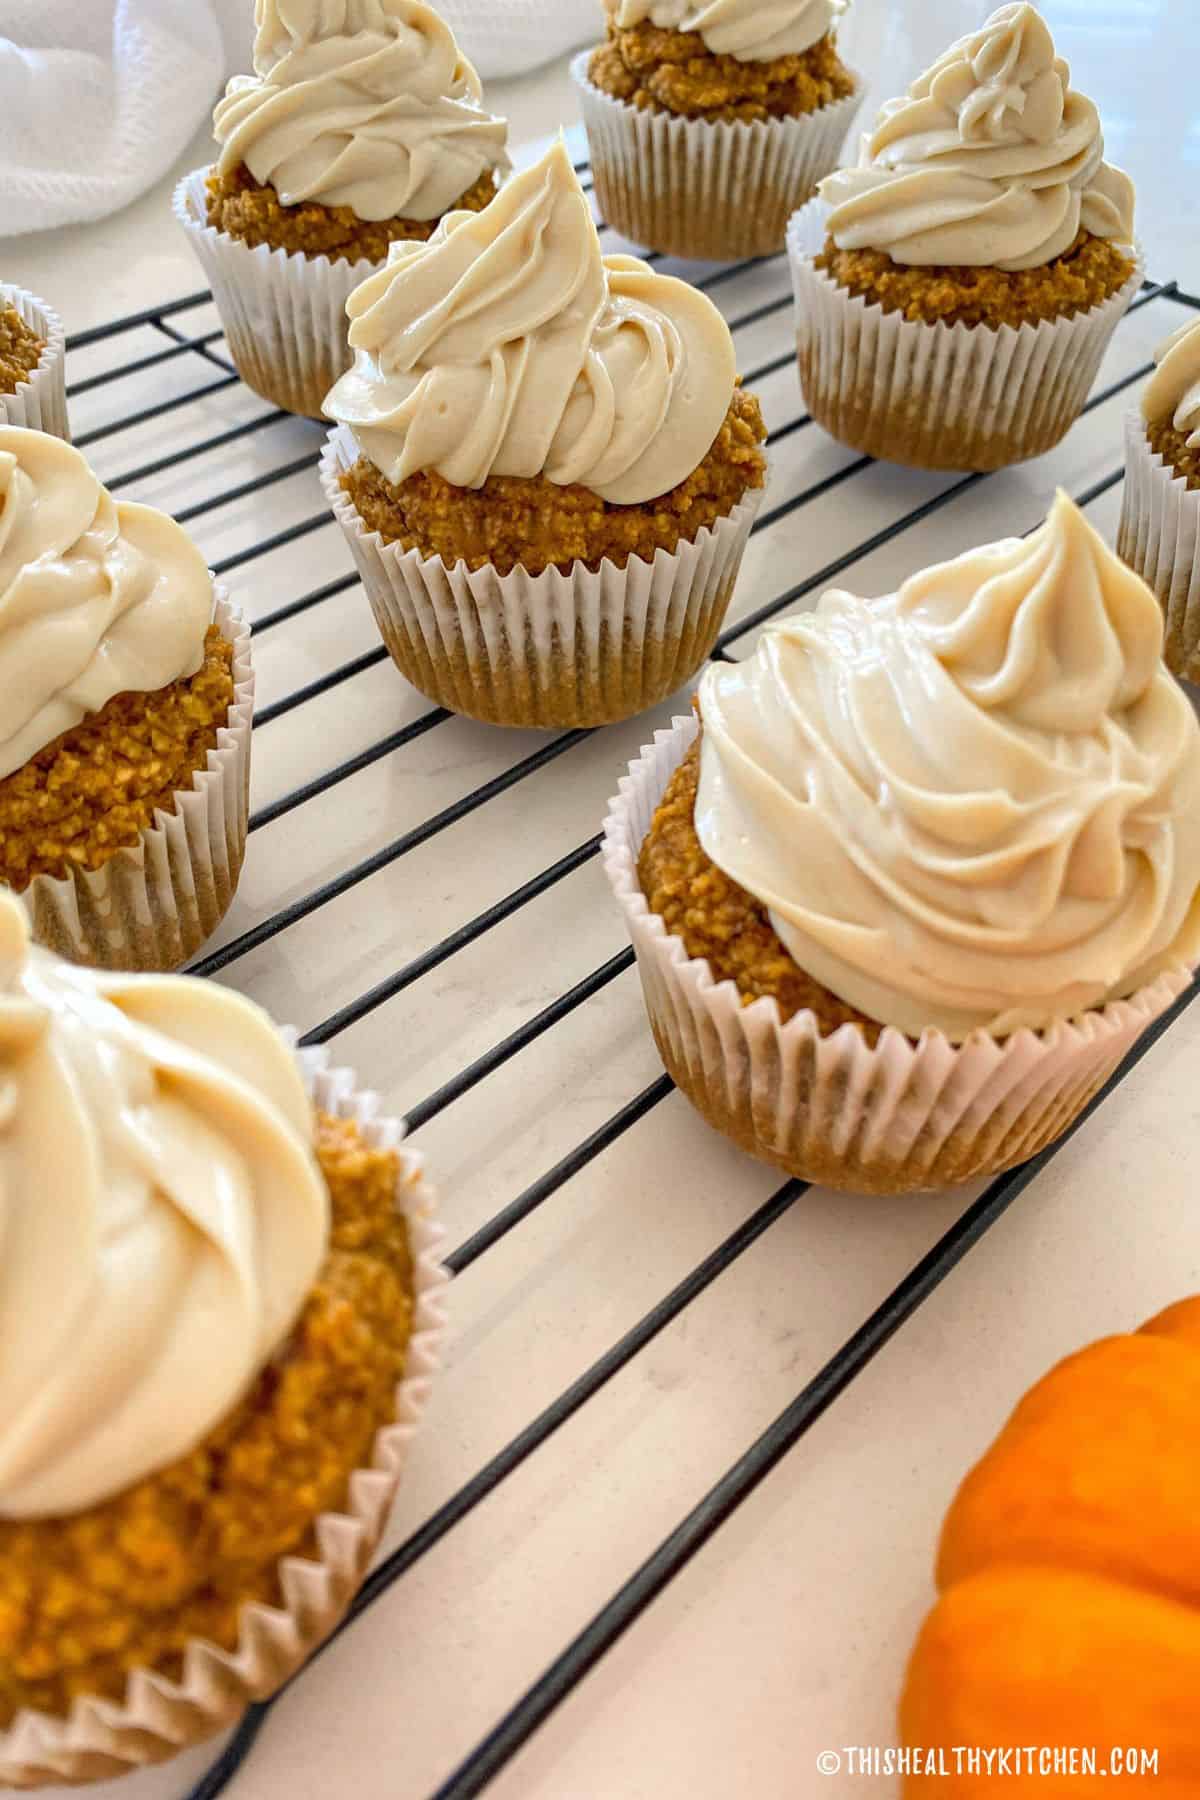 Frosted cupcakes on cooling rack with decorative pumpkin on the side.